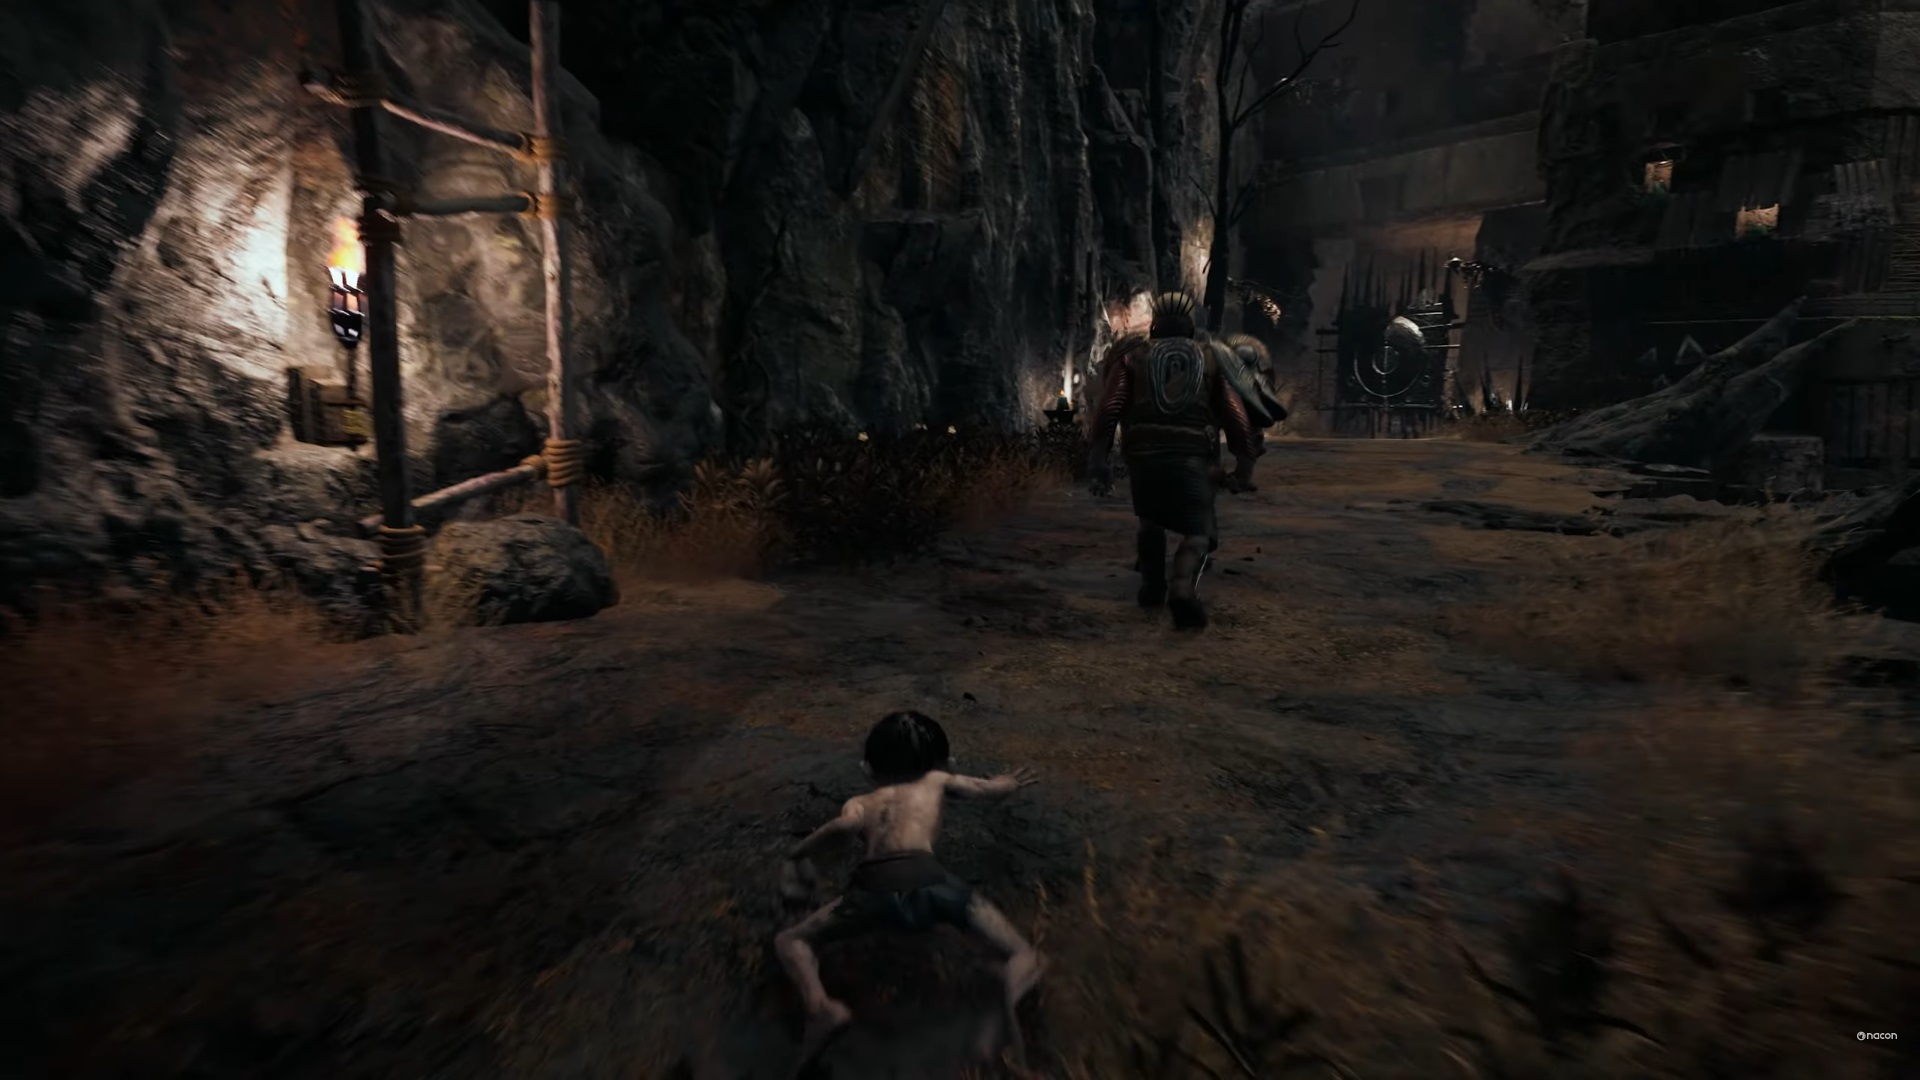 Gollum review  Lord of the Rings game hits PC, PS4, PS5 and Xbox